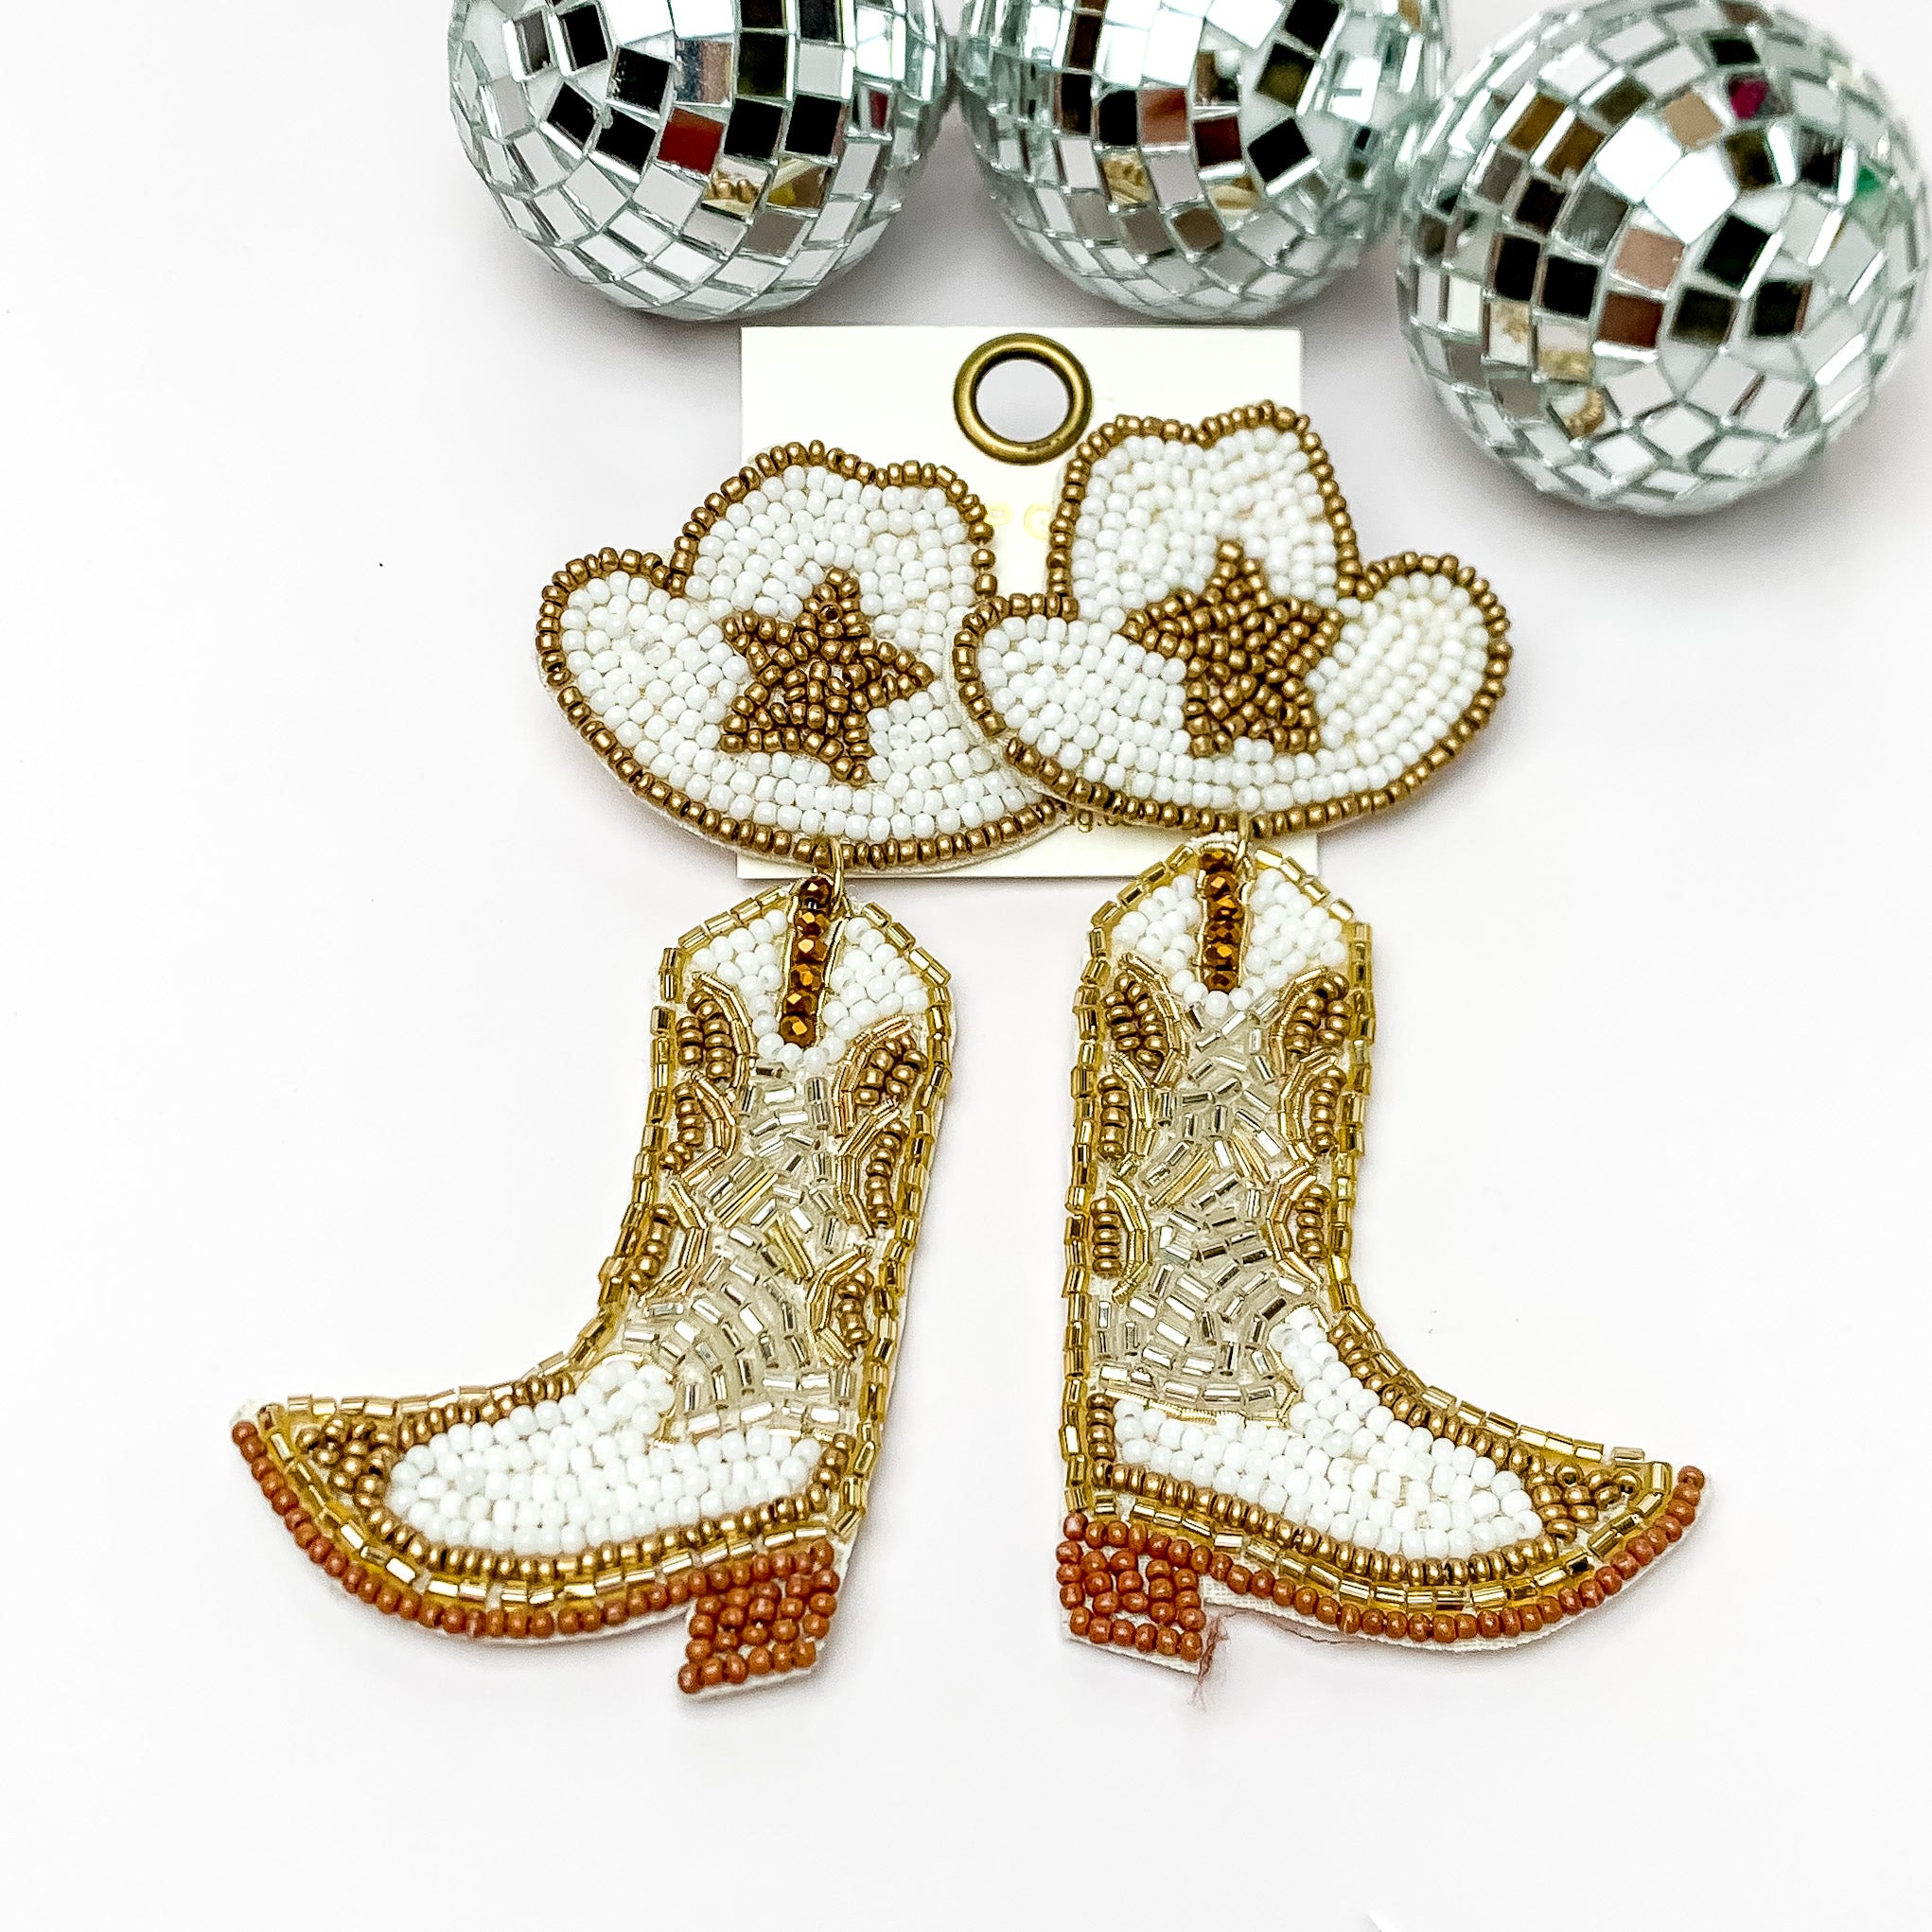 Beaded White, and Gold Cowboy Boot Earrings with Hat Studs. Pictured on a white background with disco balls at the top.